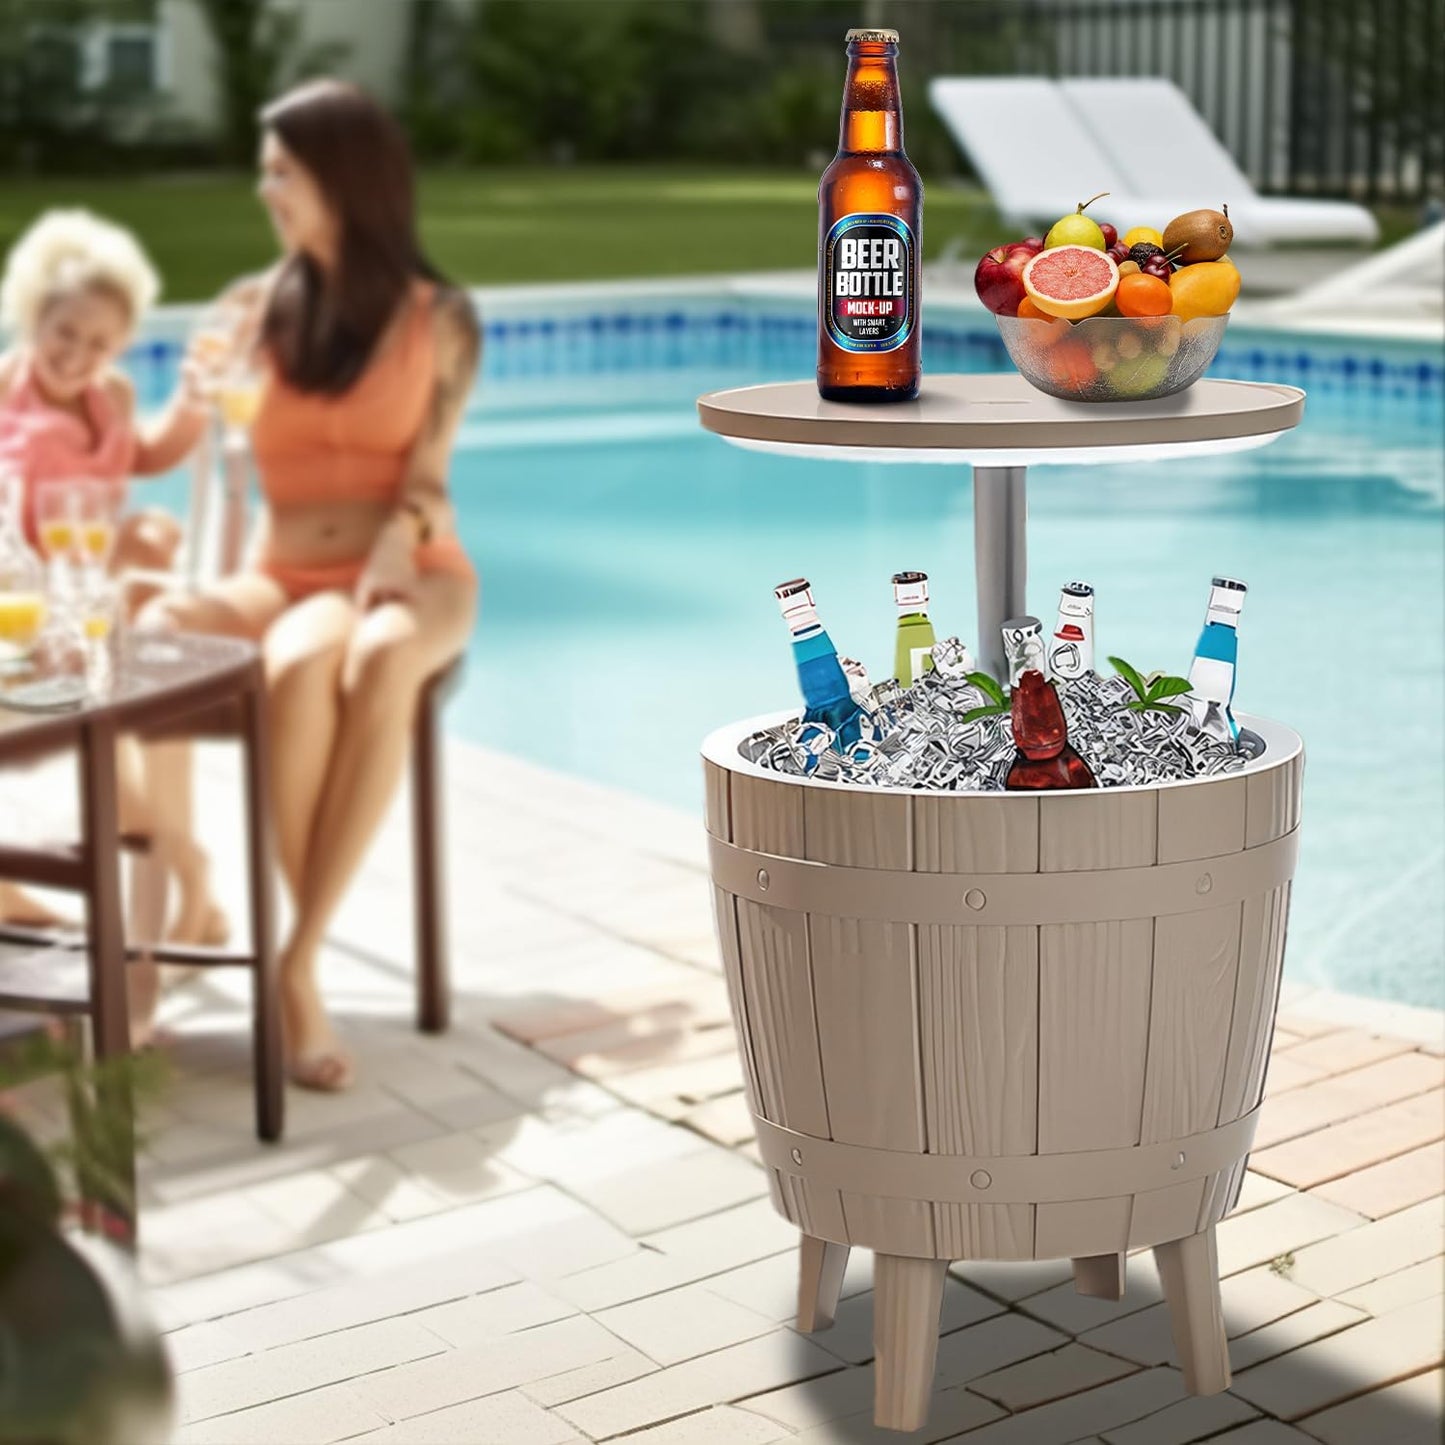 OUTSTANDING Outdoor Cool Bar Table, 8 Gallon Beer and Wine Cooler Table, Patio Furniture & Hot Tub Side Table, Beverage Cooler, Rattan Style Patio, Cocktail Bar for Patio Pool Party-Grey